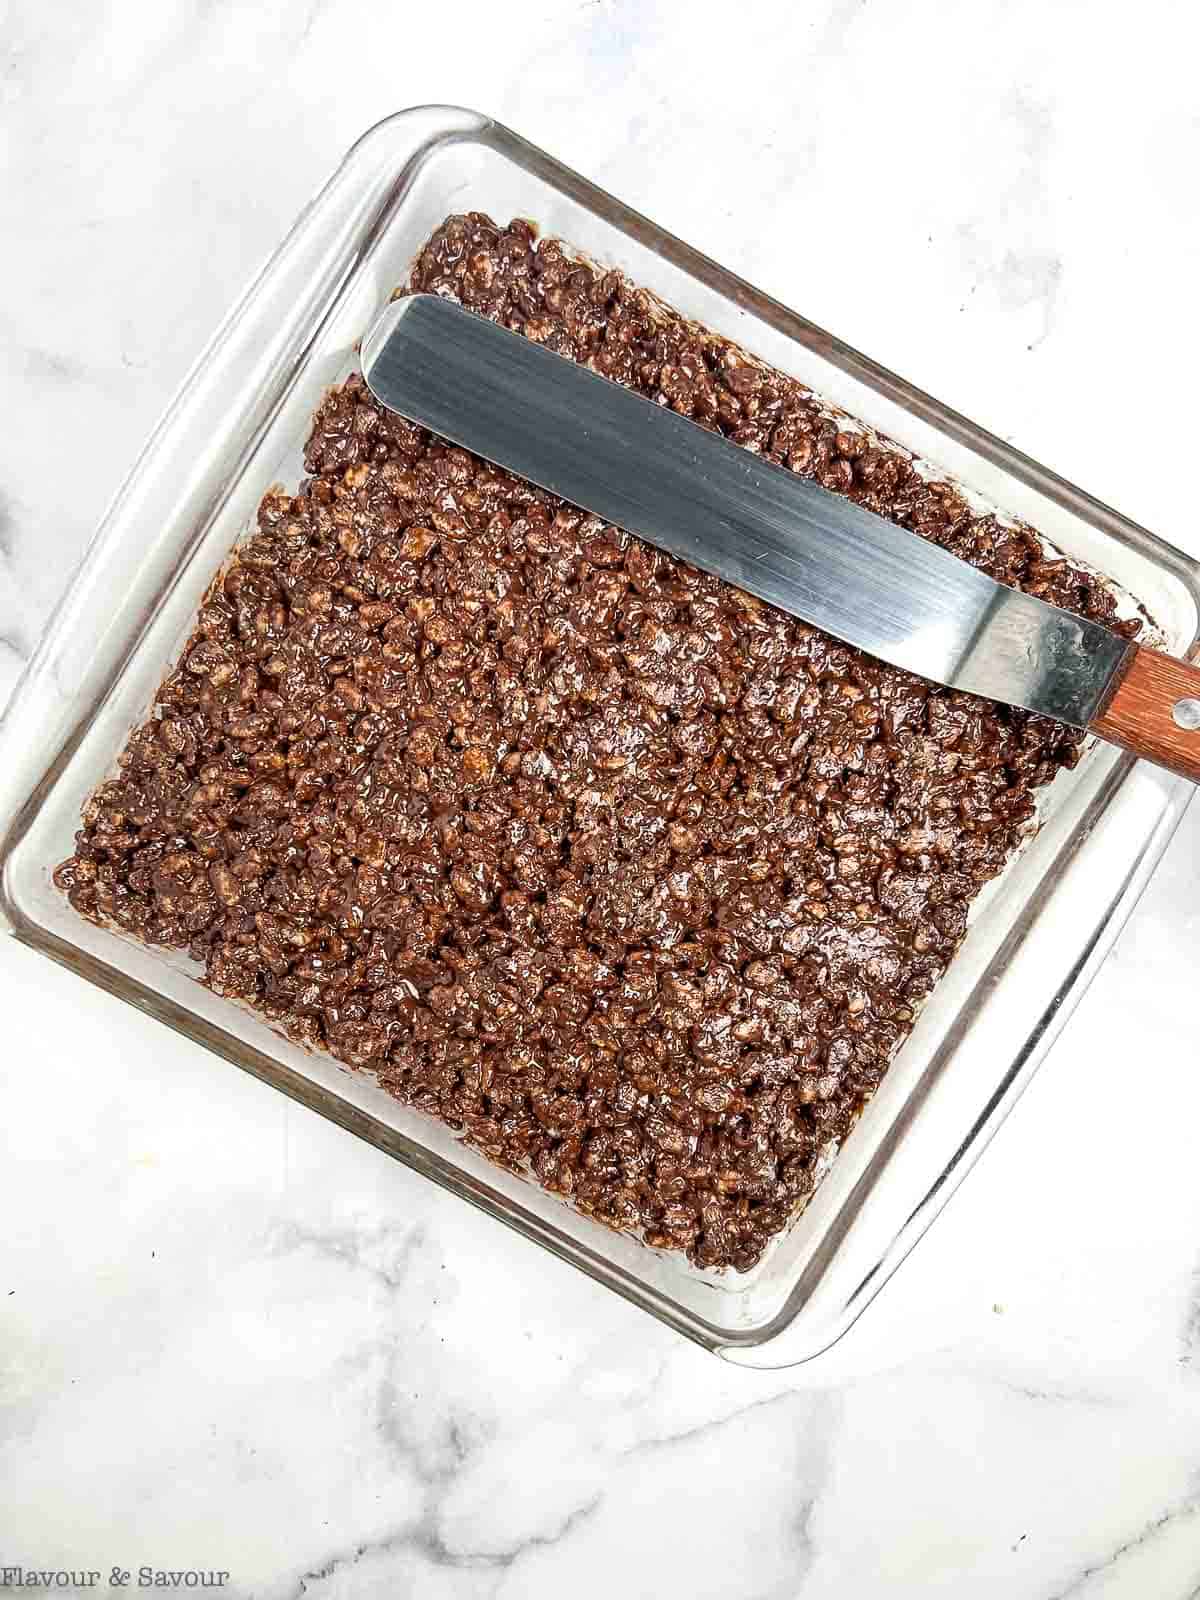 Pressing chocolate peanut butter rice krispie squares mixture into an 8-inch square baking dish.